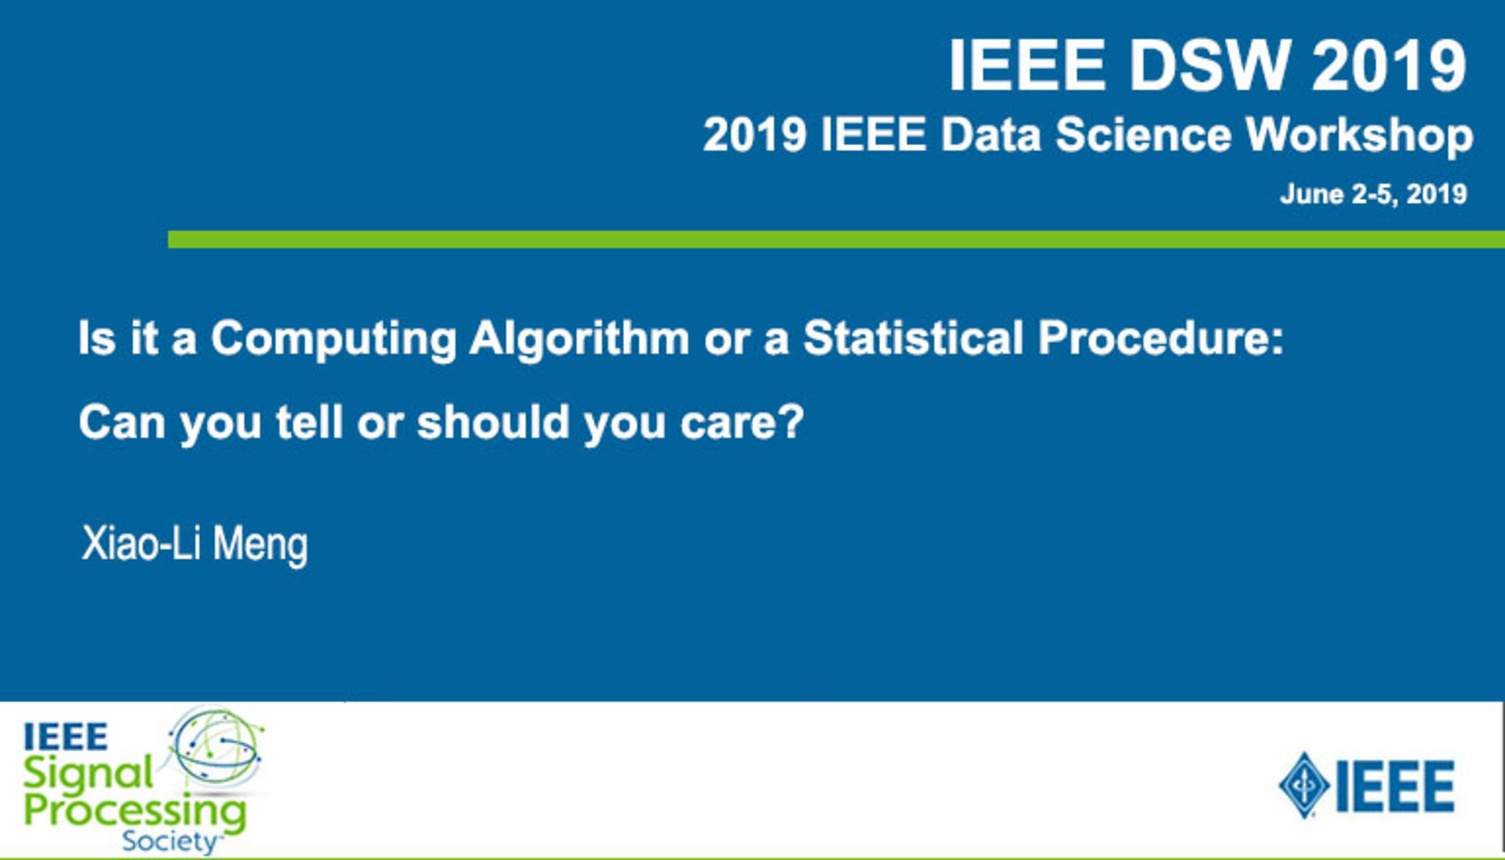 Is it a Computing Algorithm or a Statistical Procedure: Can you tell or should you care?